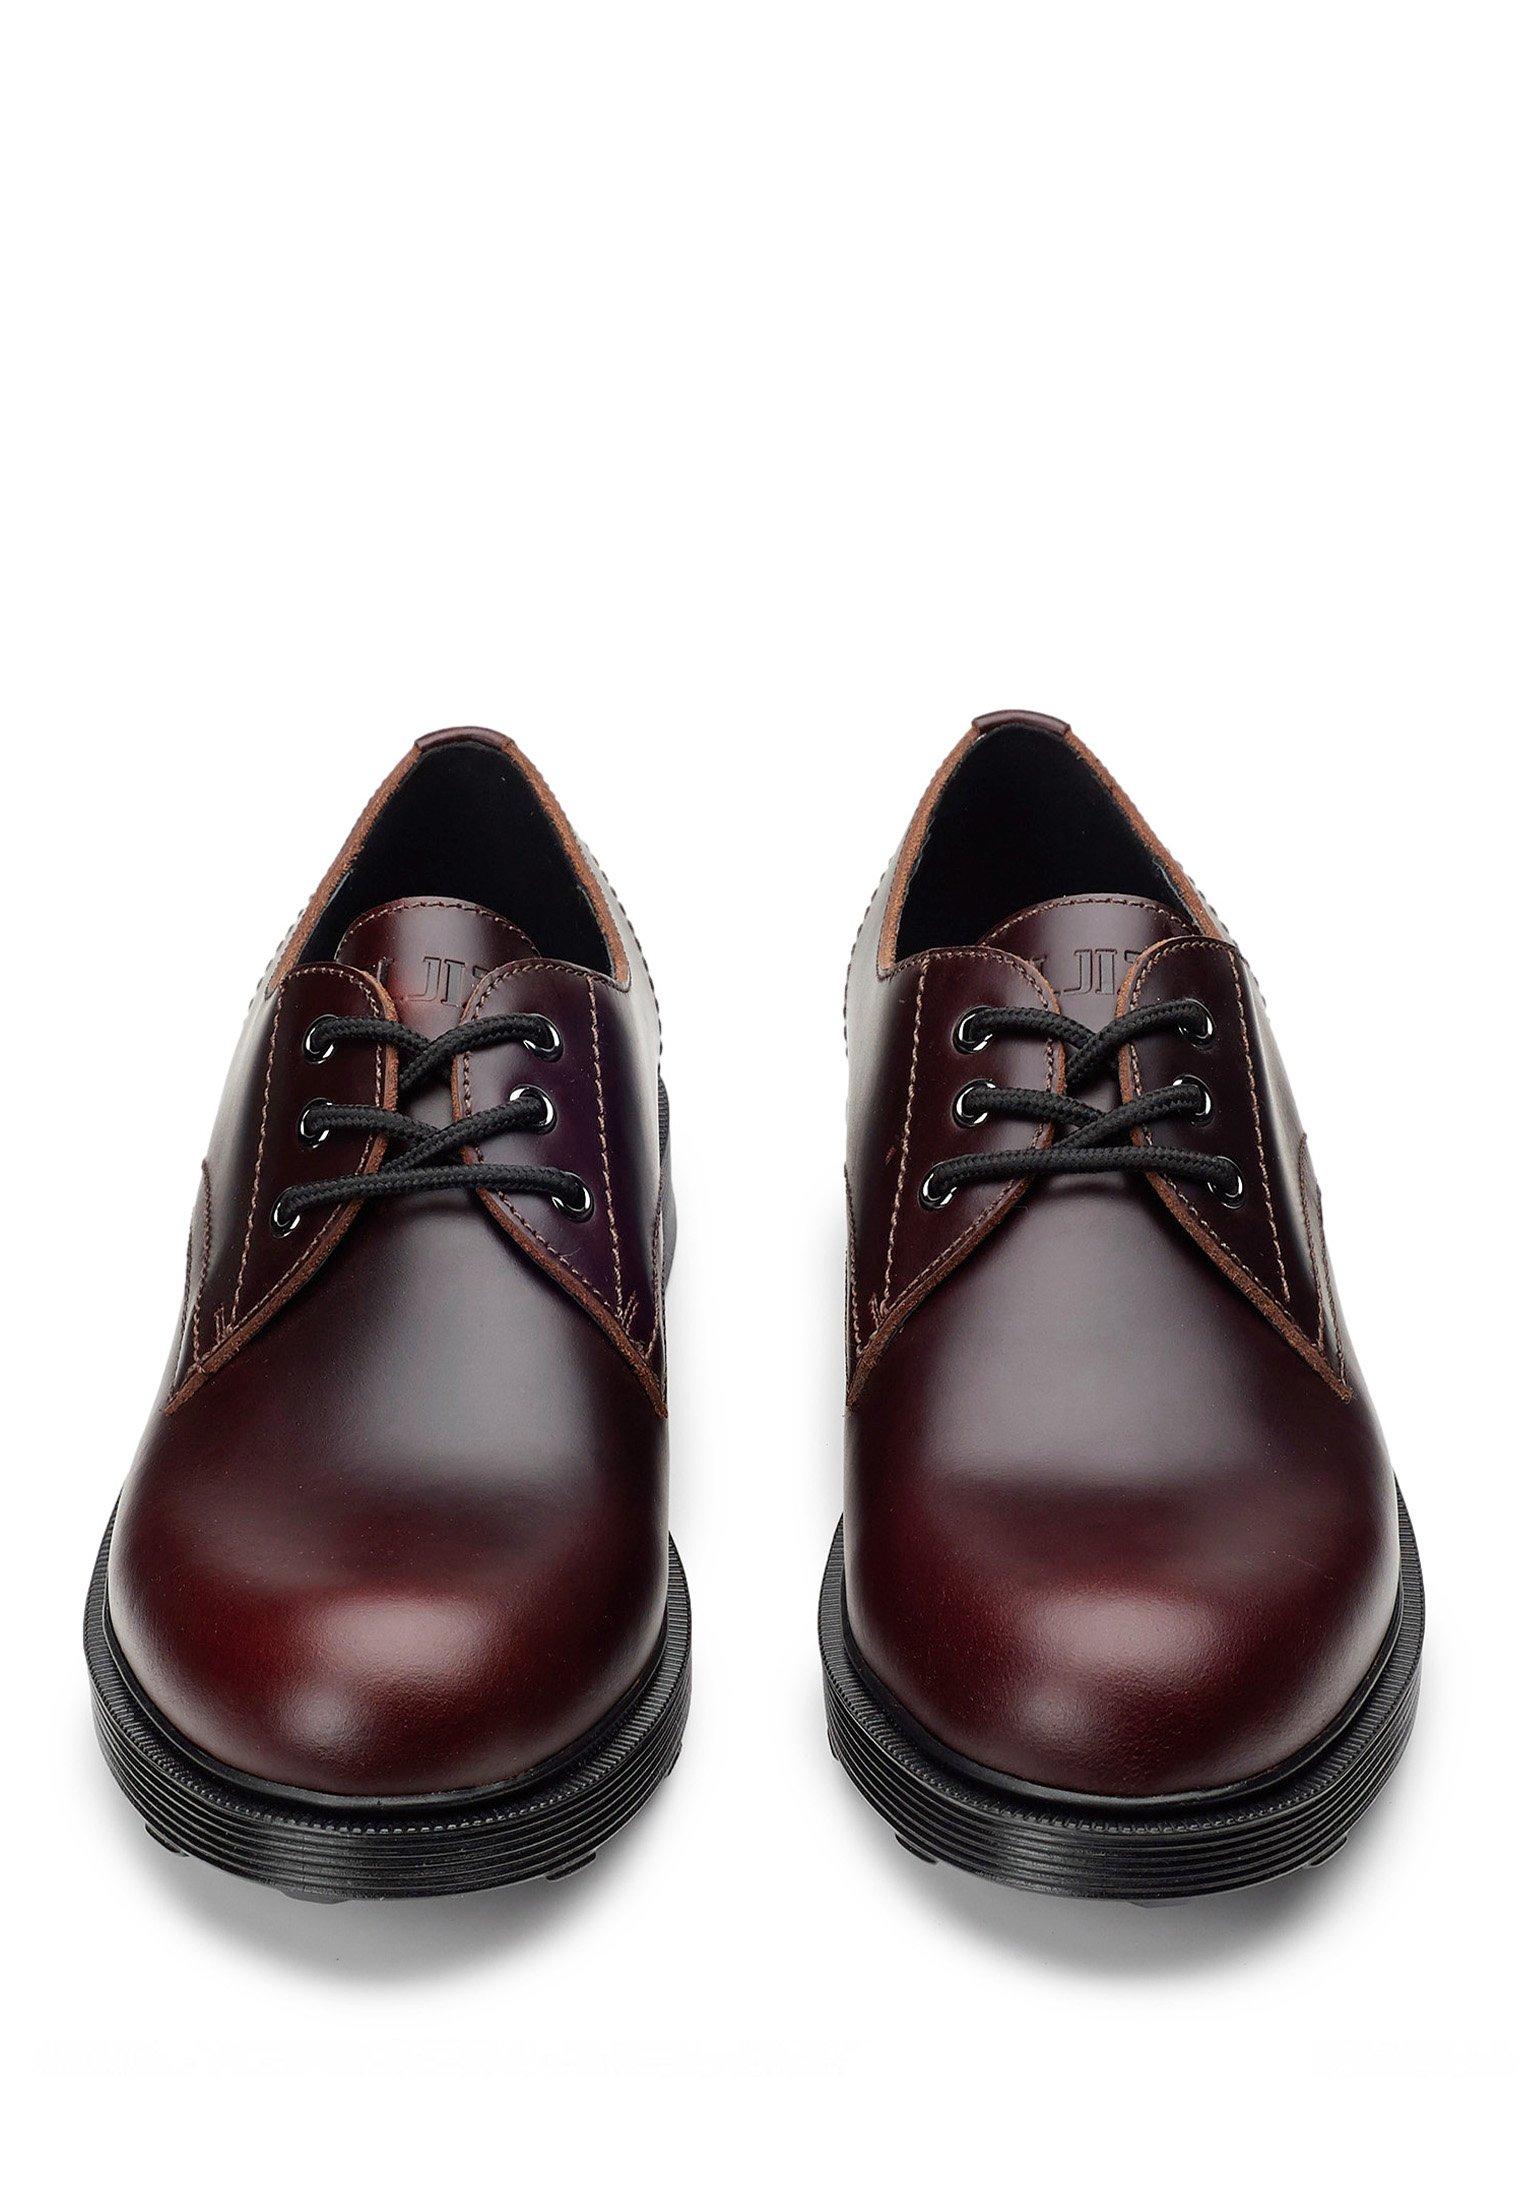 Cult  Oxfords OZZY 3716 